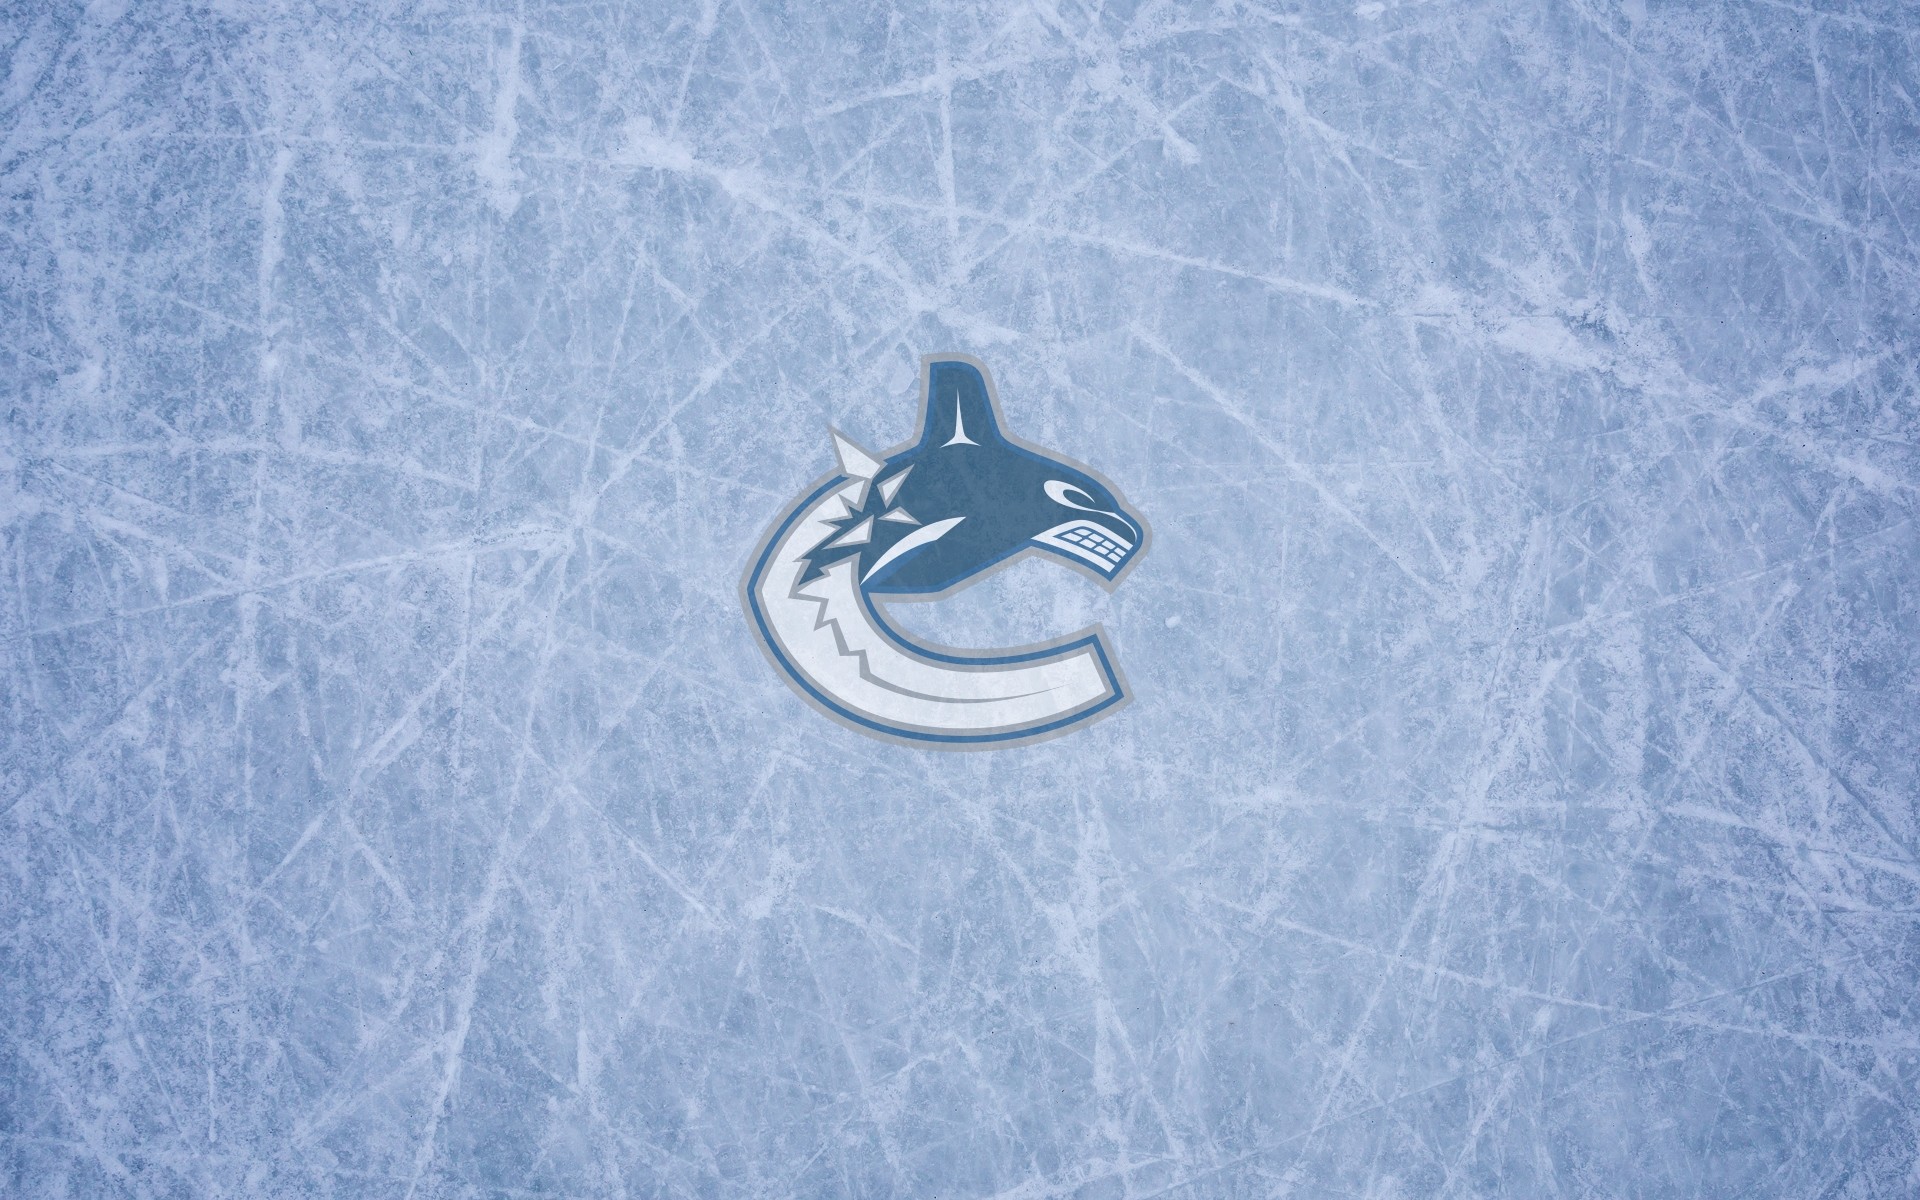 1920x1200 Vancouver Canucks wallpaper, logo and ice, , 16x10, widescreen